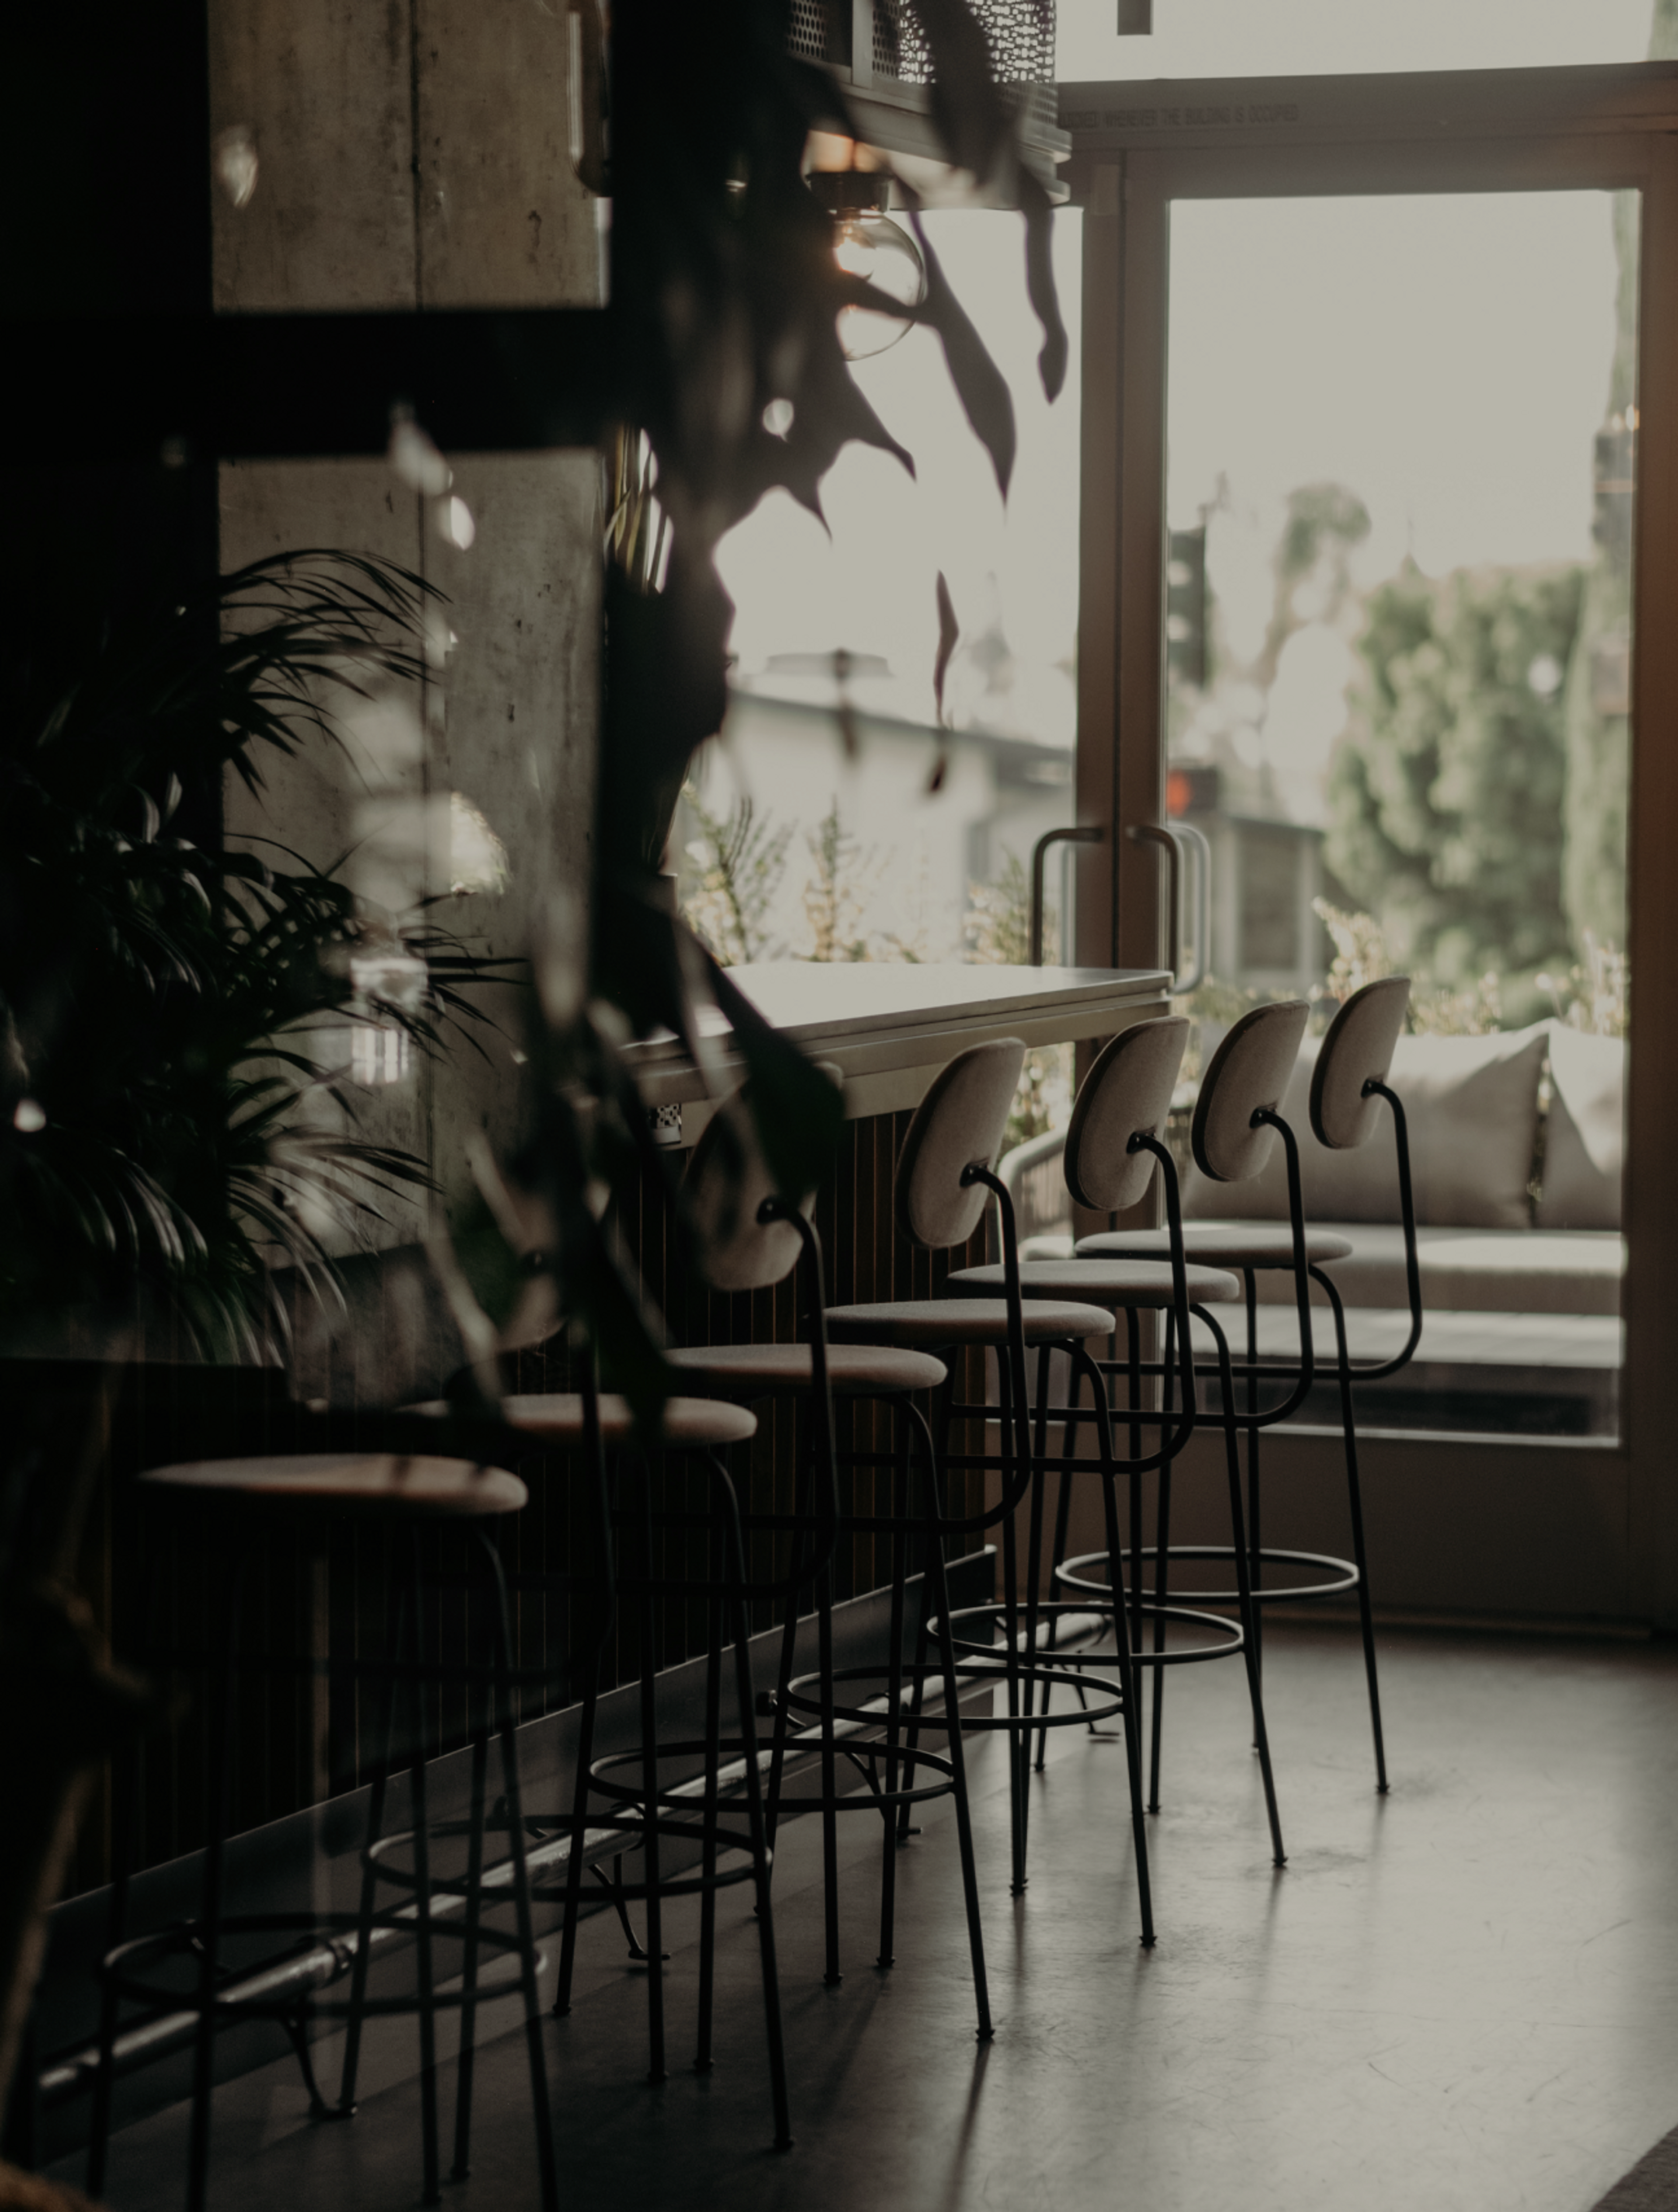 Row of barstools with plants in the foreground